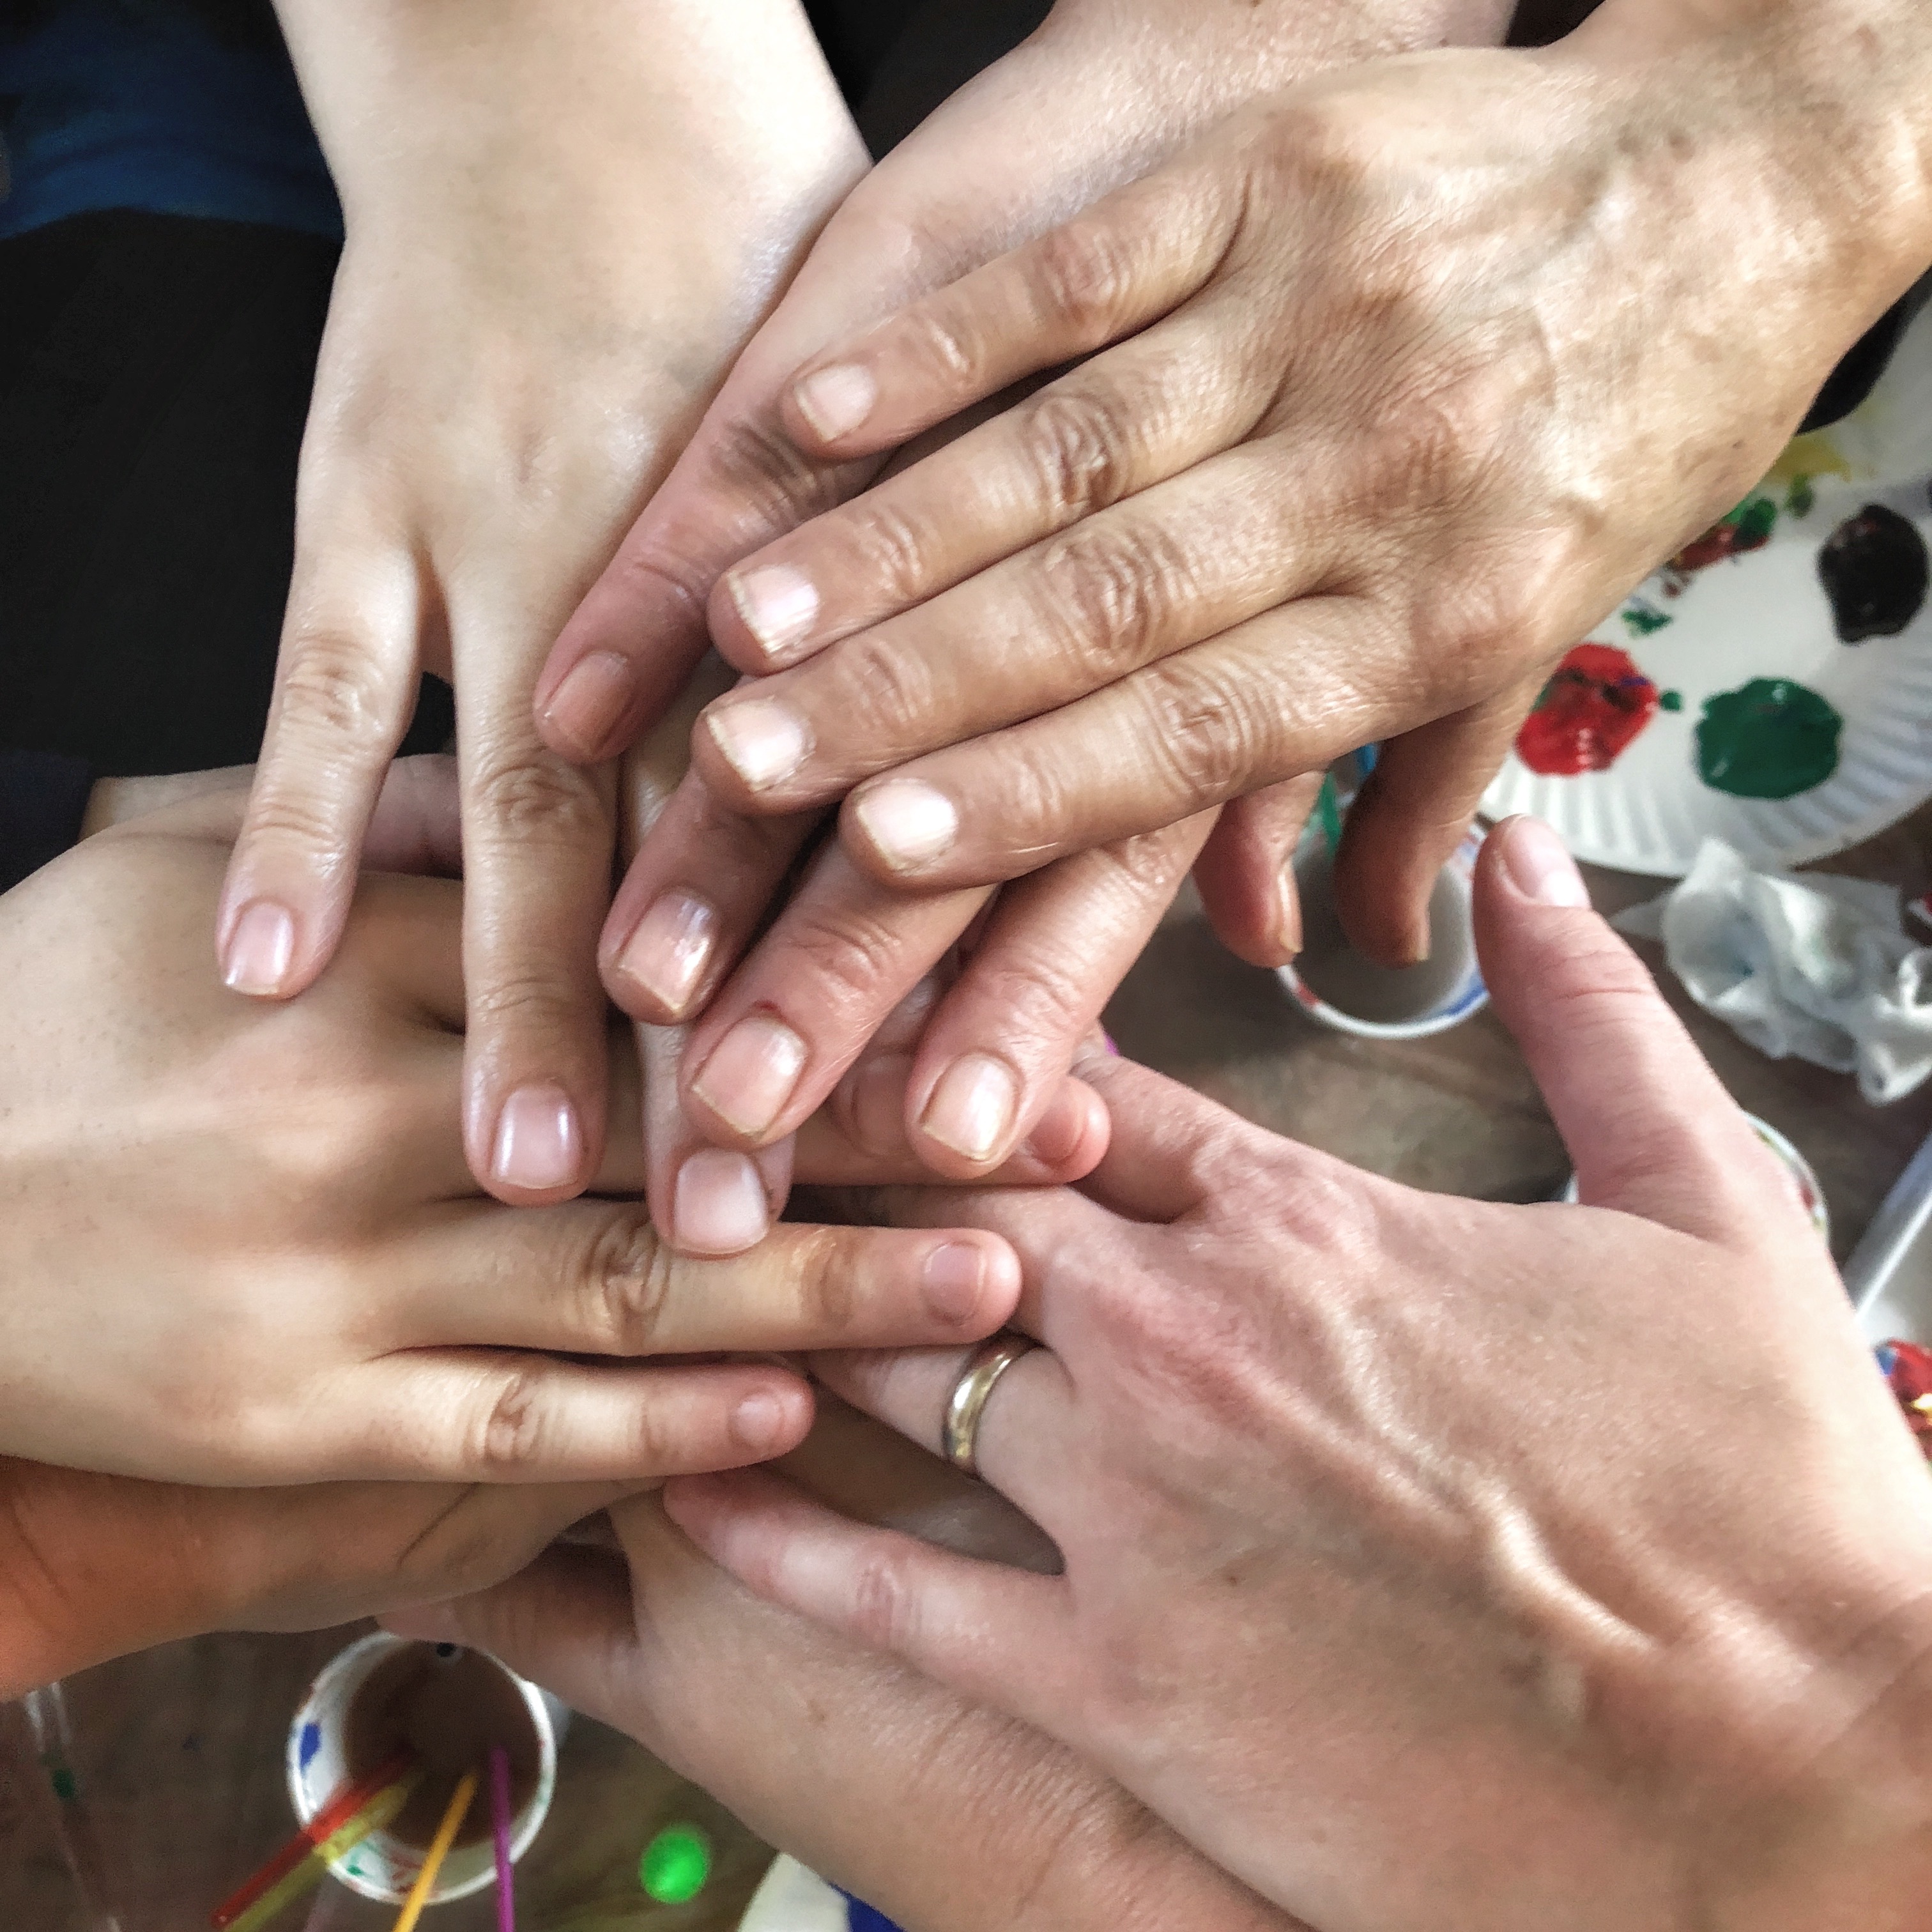 One day in knitting group, they asked no pics be taken so I asked my group to place our hands together. These hands represent so much my heart can't even put these moments into words.